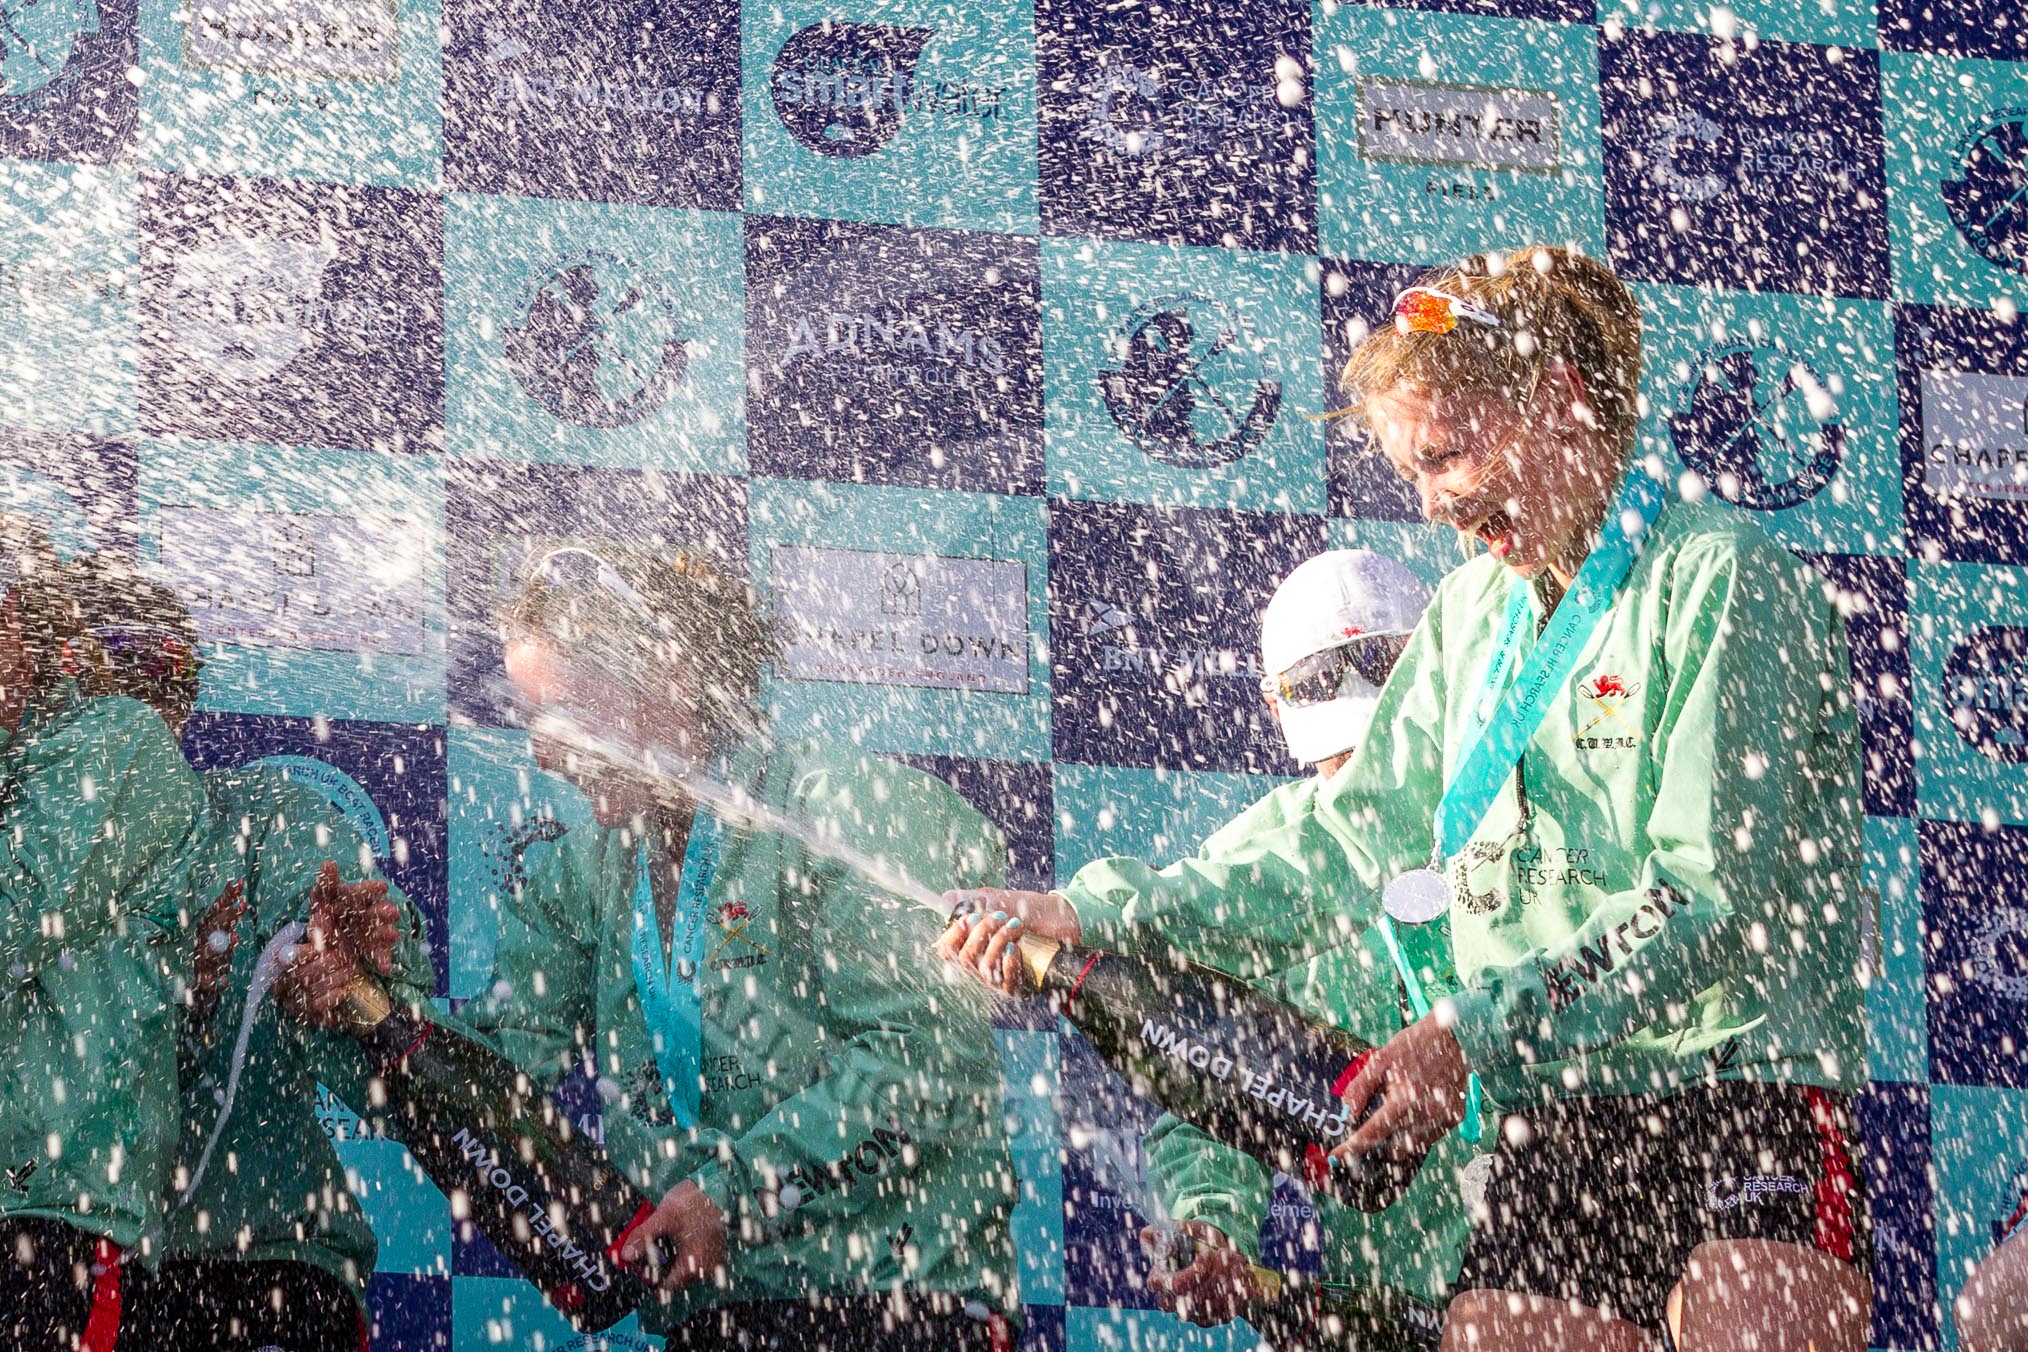 The Boat Race season 2017 -  The Cancer Research Women's Boat Race: CUWBC covered in spray (Cahmpagne, not Thames water) at the price giving.
River Thames between Putney Bridge and Mortlake,
London SW15,

United Kingdom,
on 02 April 2017 at 17:13, image #265